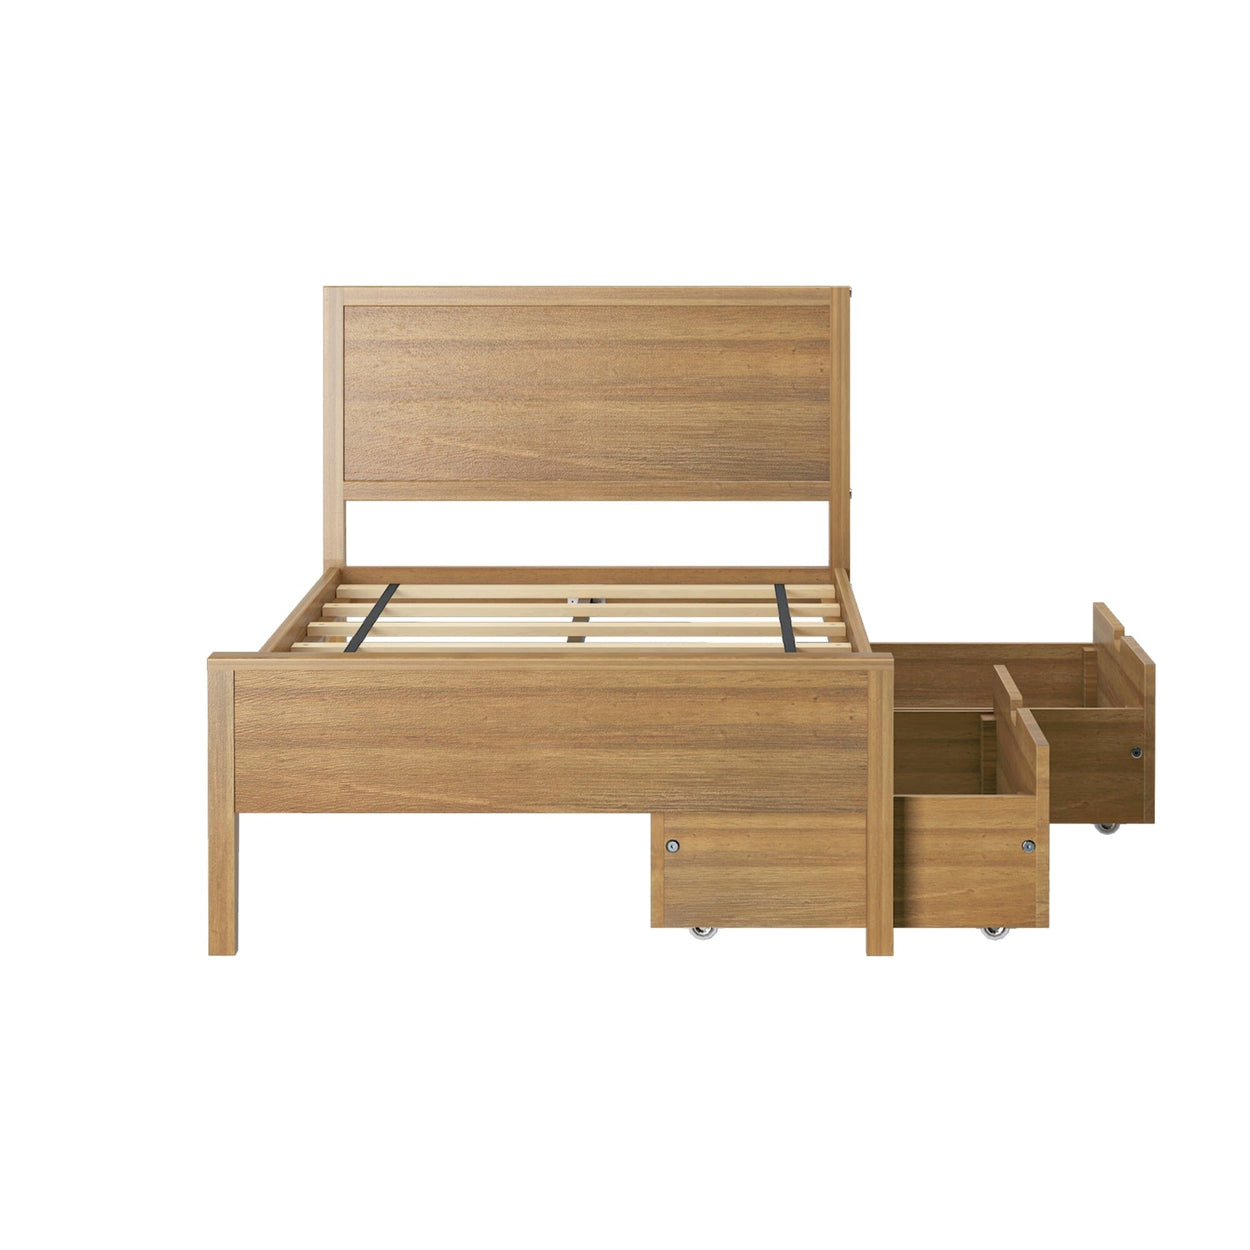 187100-007 : Kids Beds Classic Twin-Size Bed with Panel Headboard and Storage Drawers, Pecan